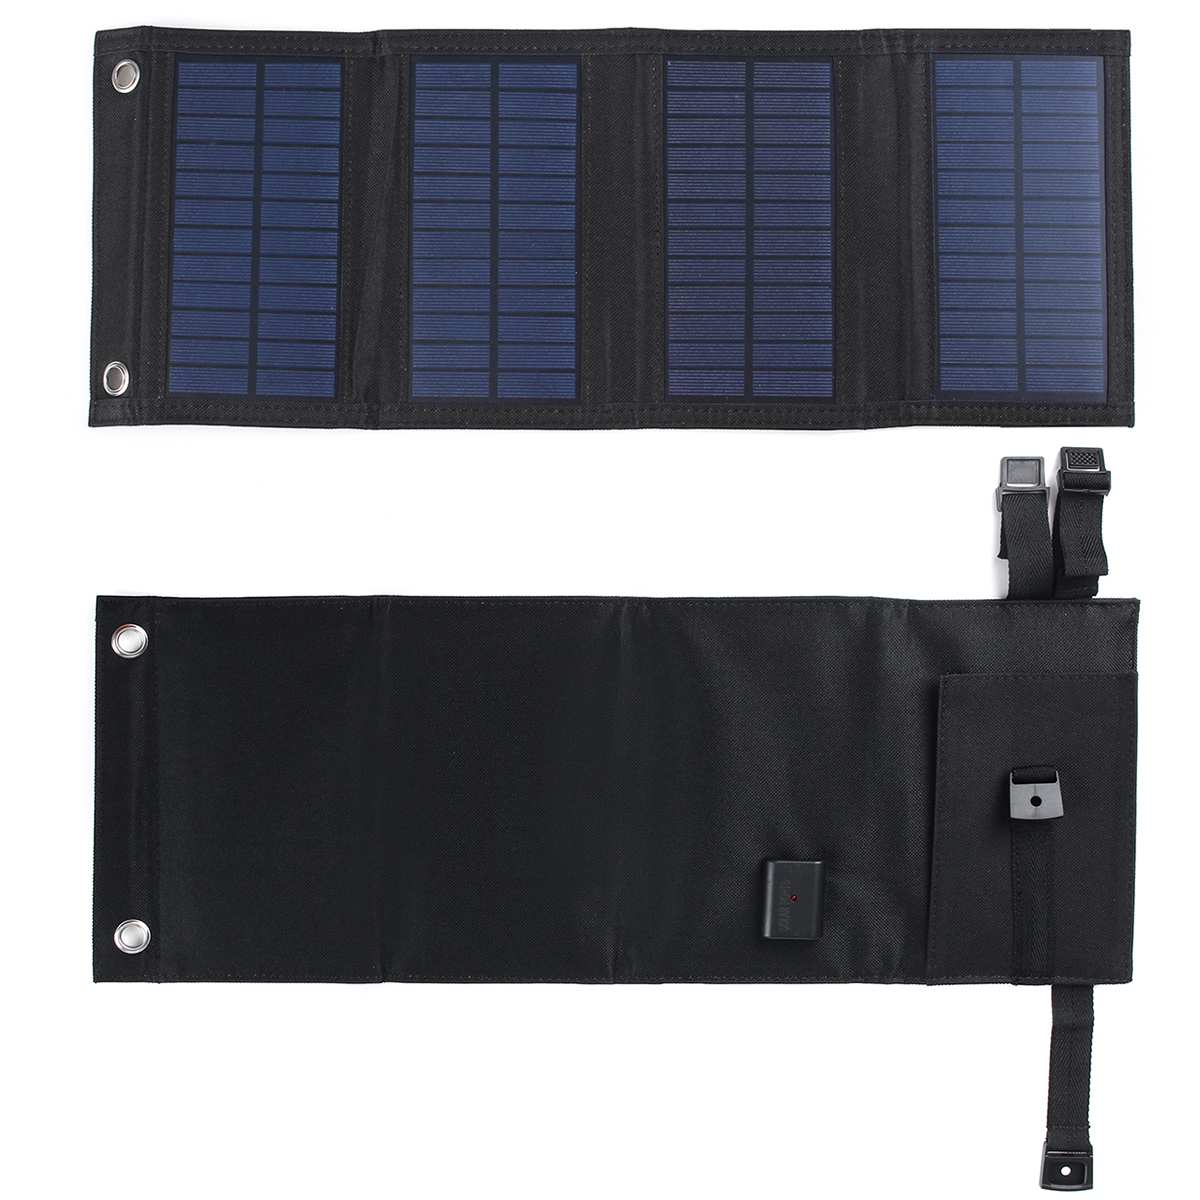 Portable 50W 5V Solar Panel Phone Charger USB Folding Solar Panels for Traval Outdoor Solar Battery Board for cellphone: Black